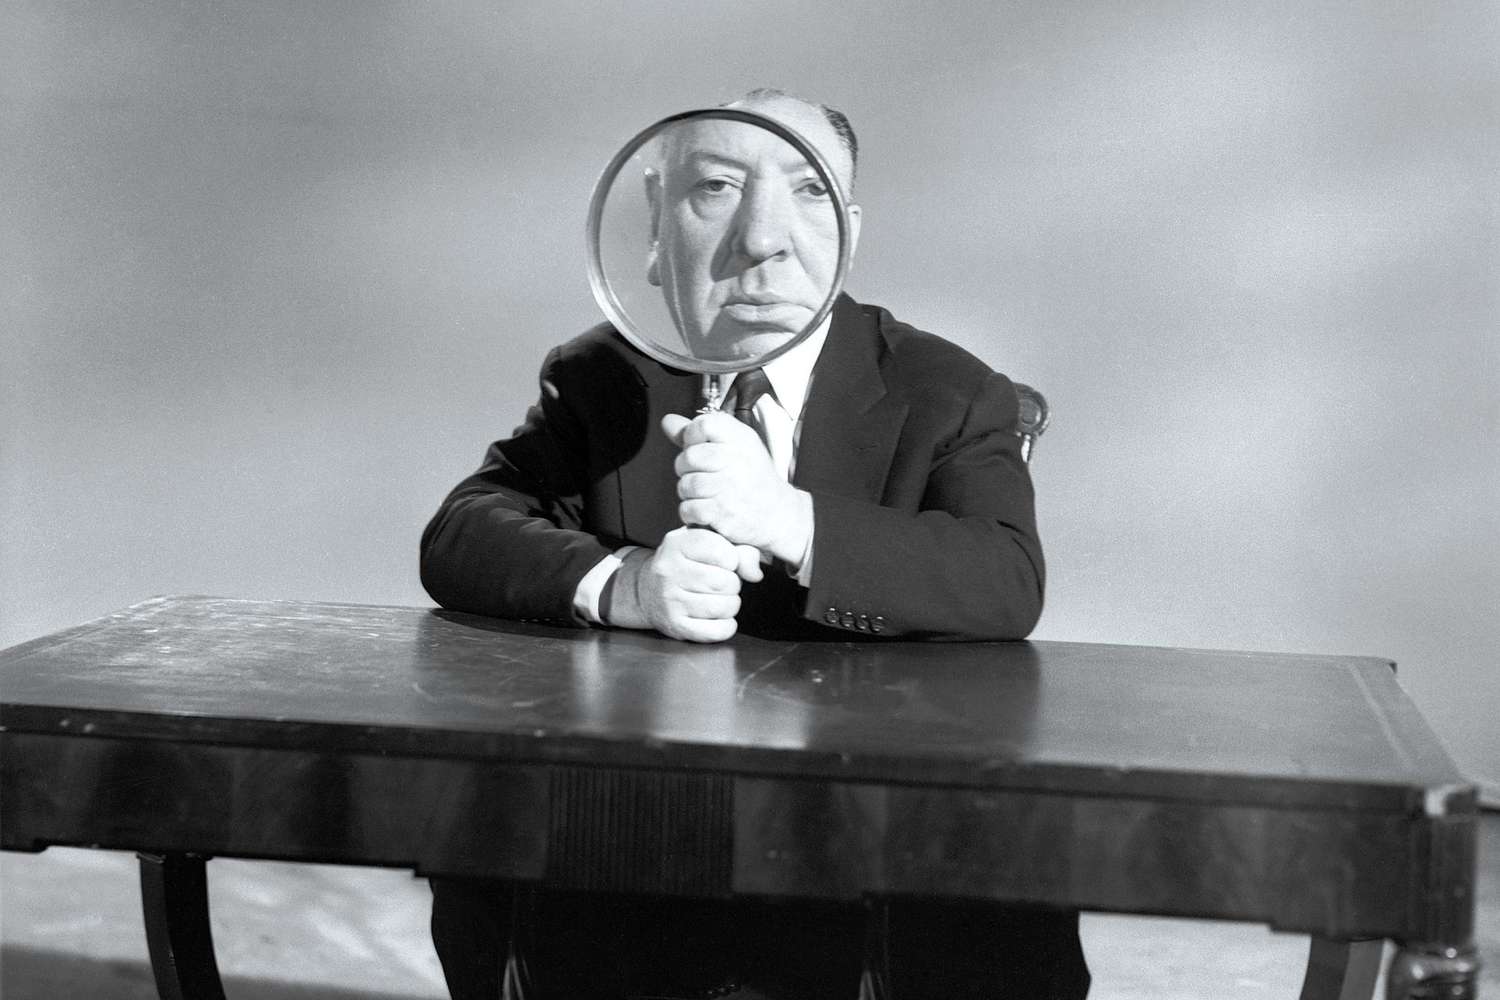 Alfred Hitchcock Holding Magnifying Glass